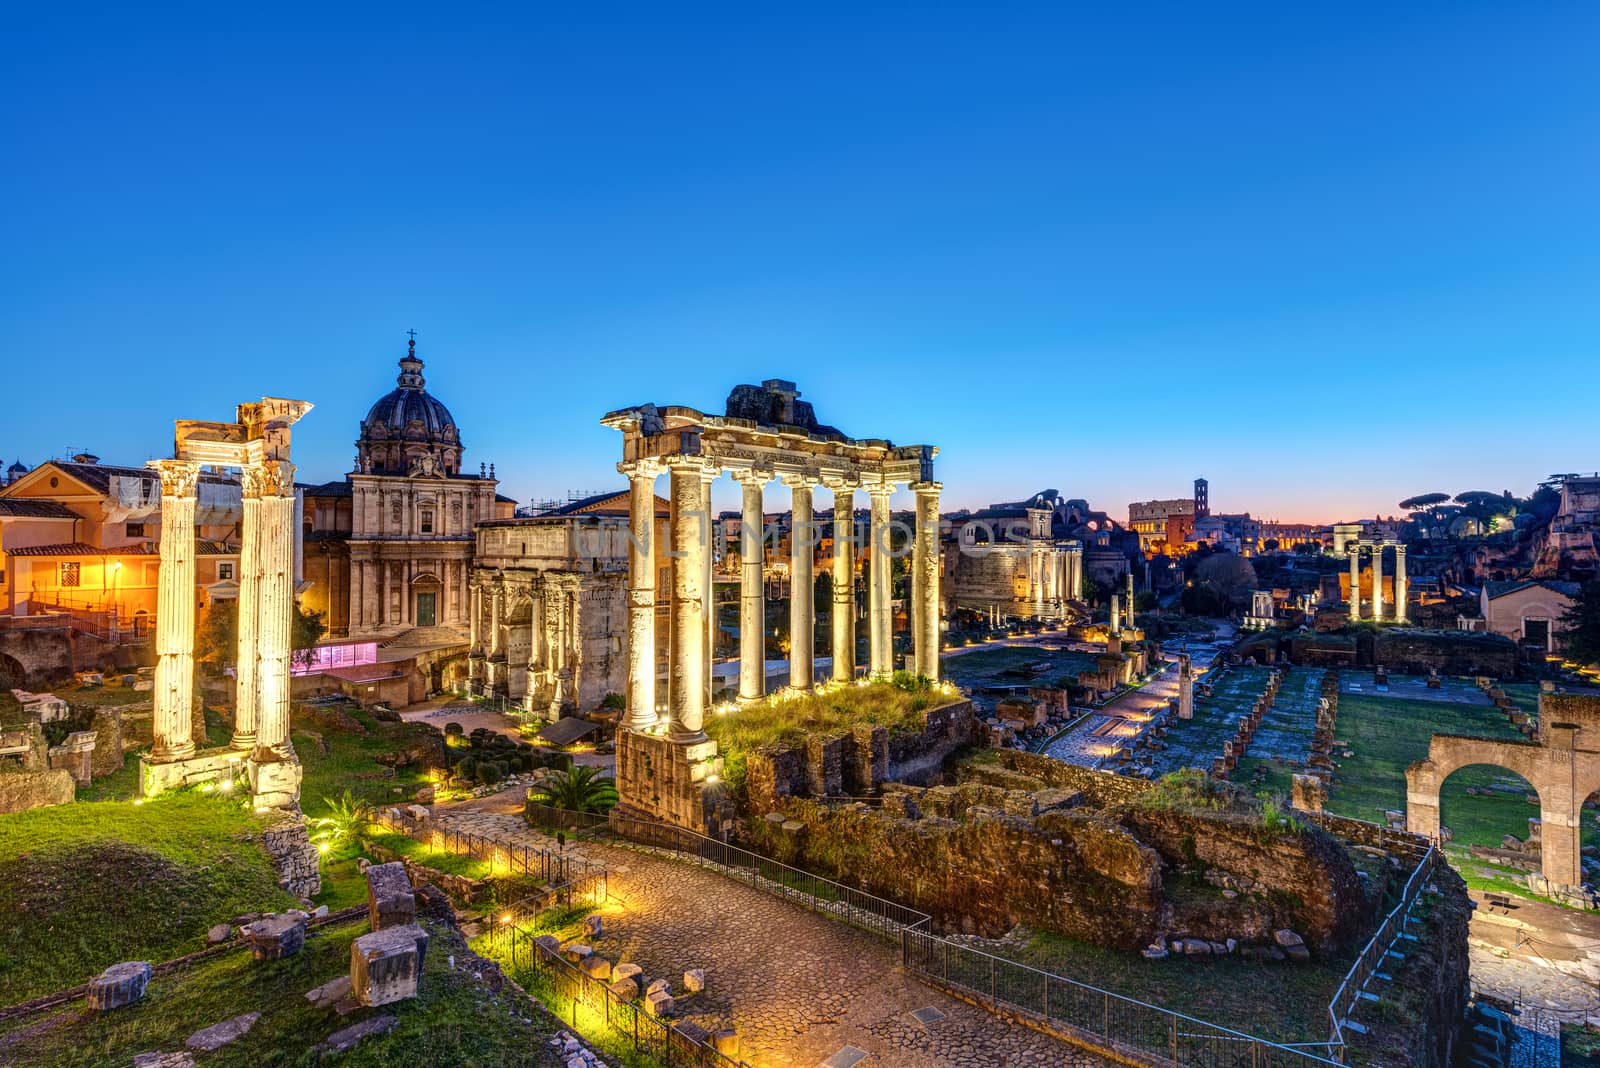 The ruins of the Roman Forum in Rome at dawn